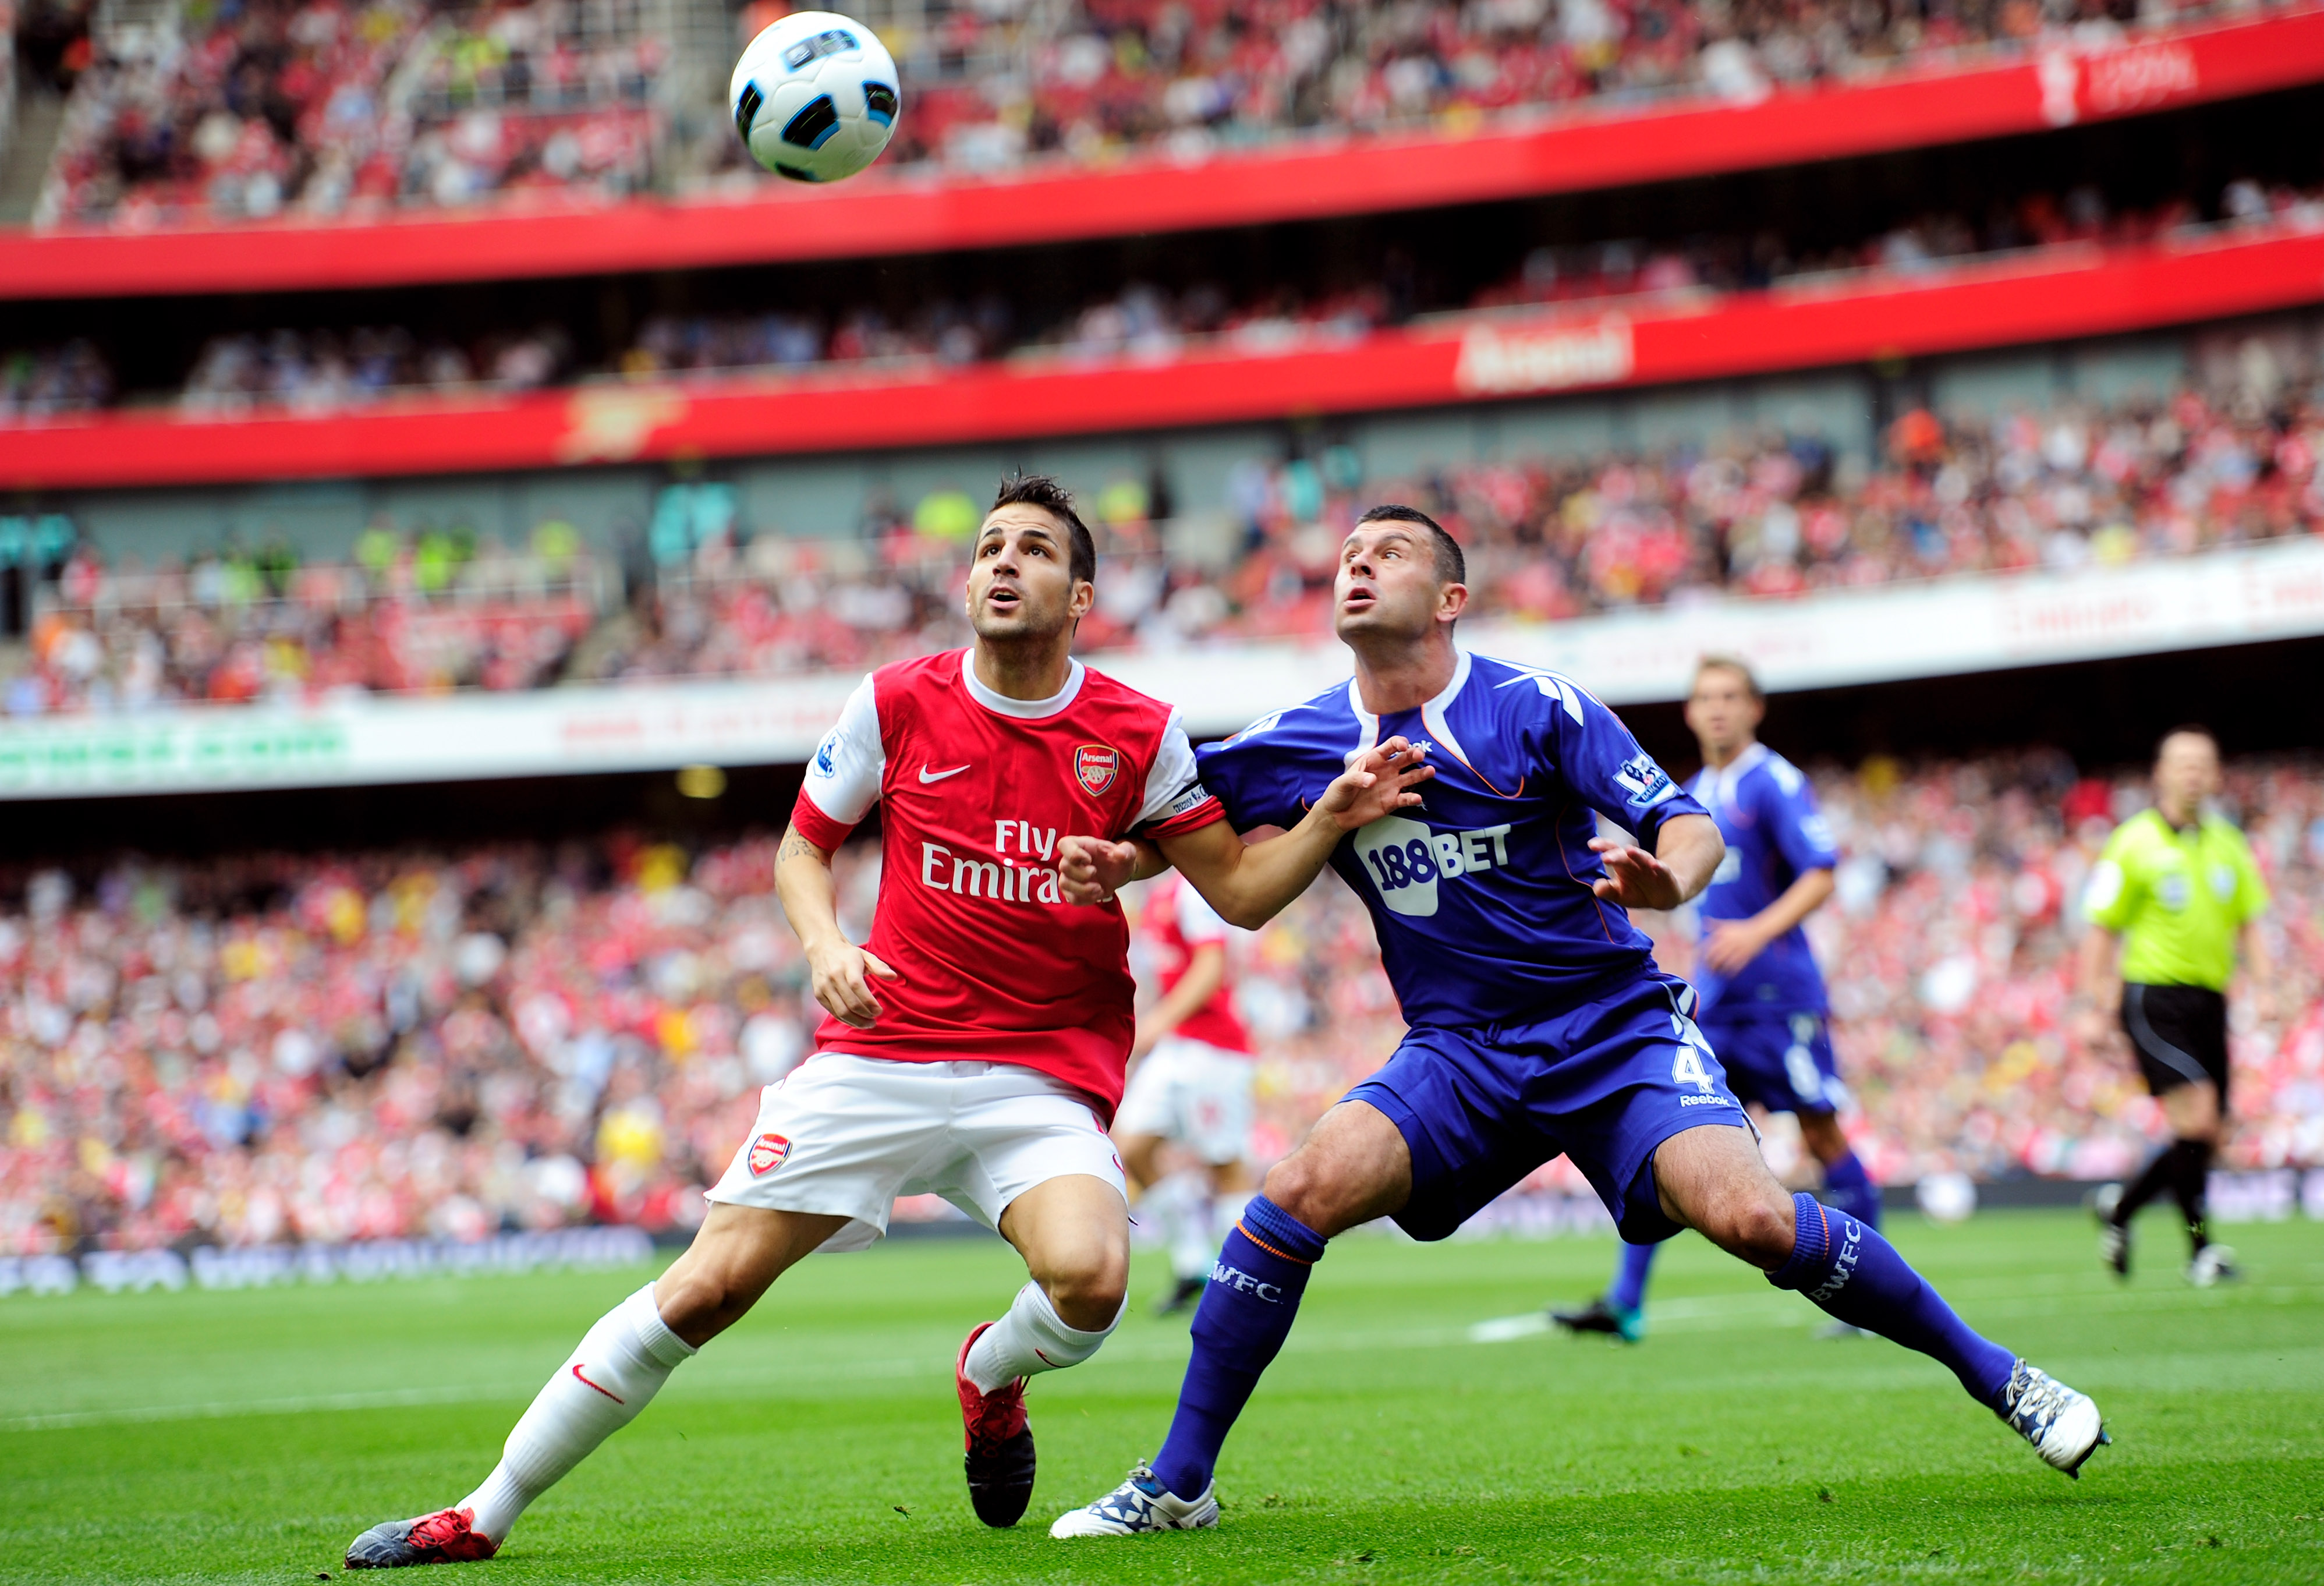 LONDON, ENGLAND - SEPTEMBER 11:  Cesc Fabregas of Arsenal battles with Paul Robinson of Bolton during the Barclays Premier League match between Arsenal and Bolton Wanderers at The Emirates Stadium on September 11, 2010 in London, England.  (Photo by Jamie